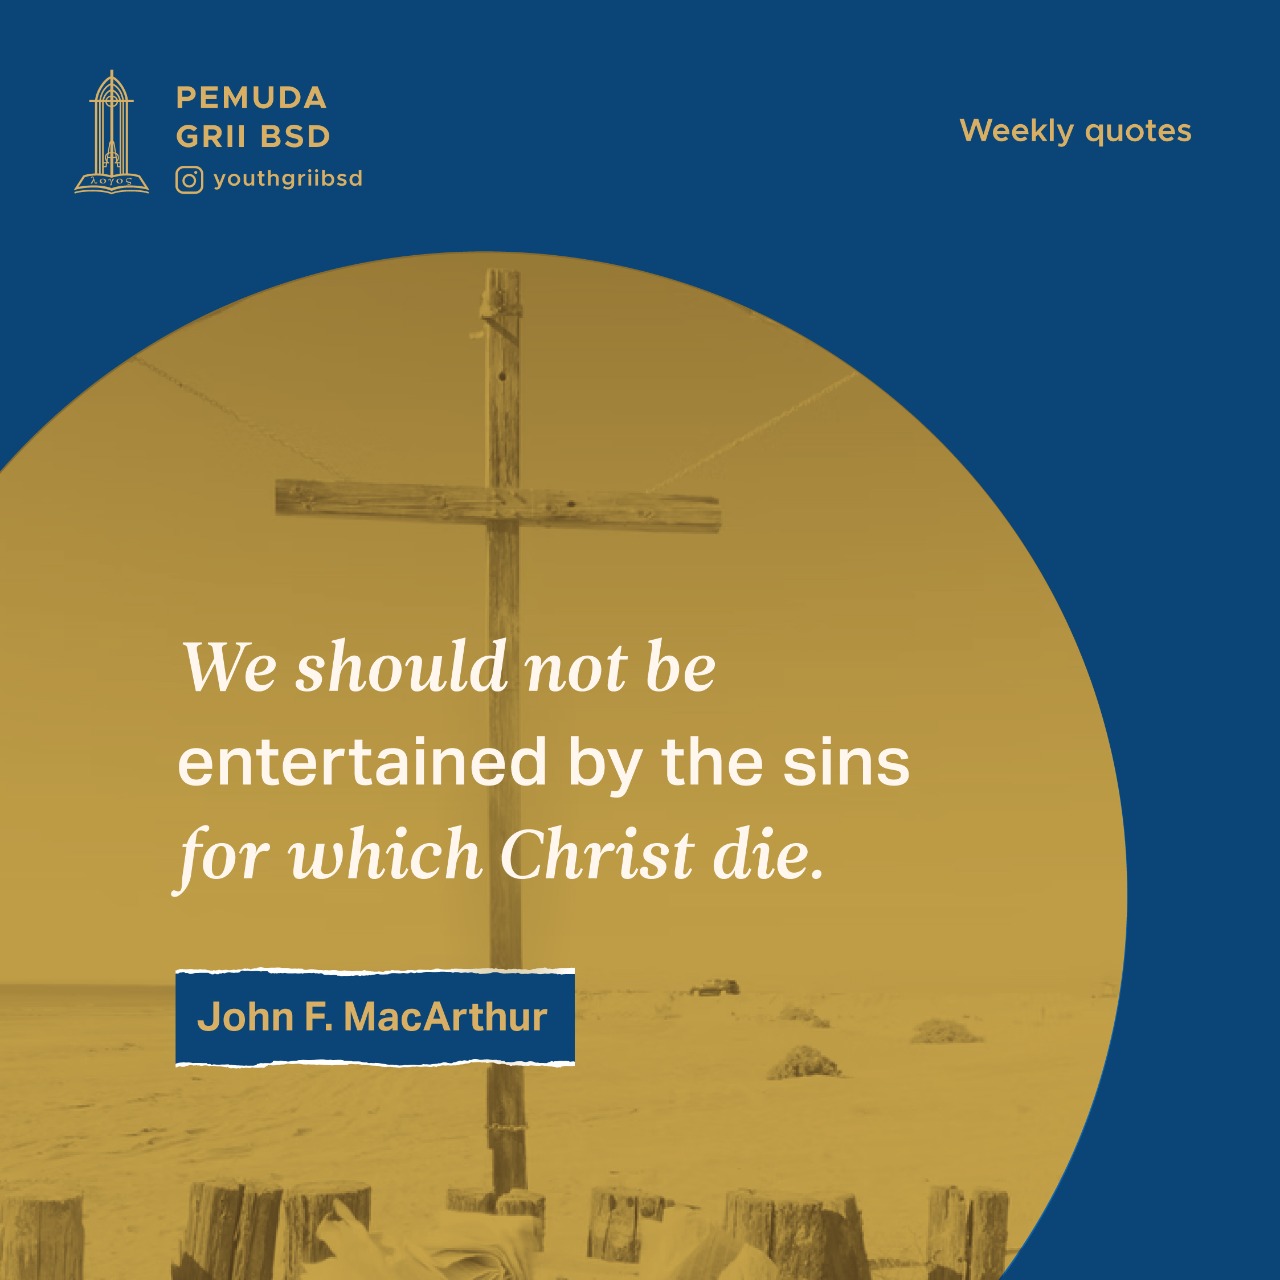 We should not be entertained by the sins for which Christ die.